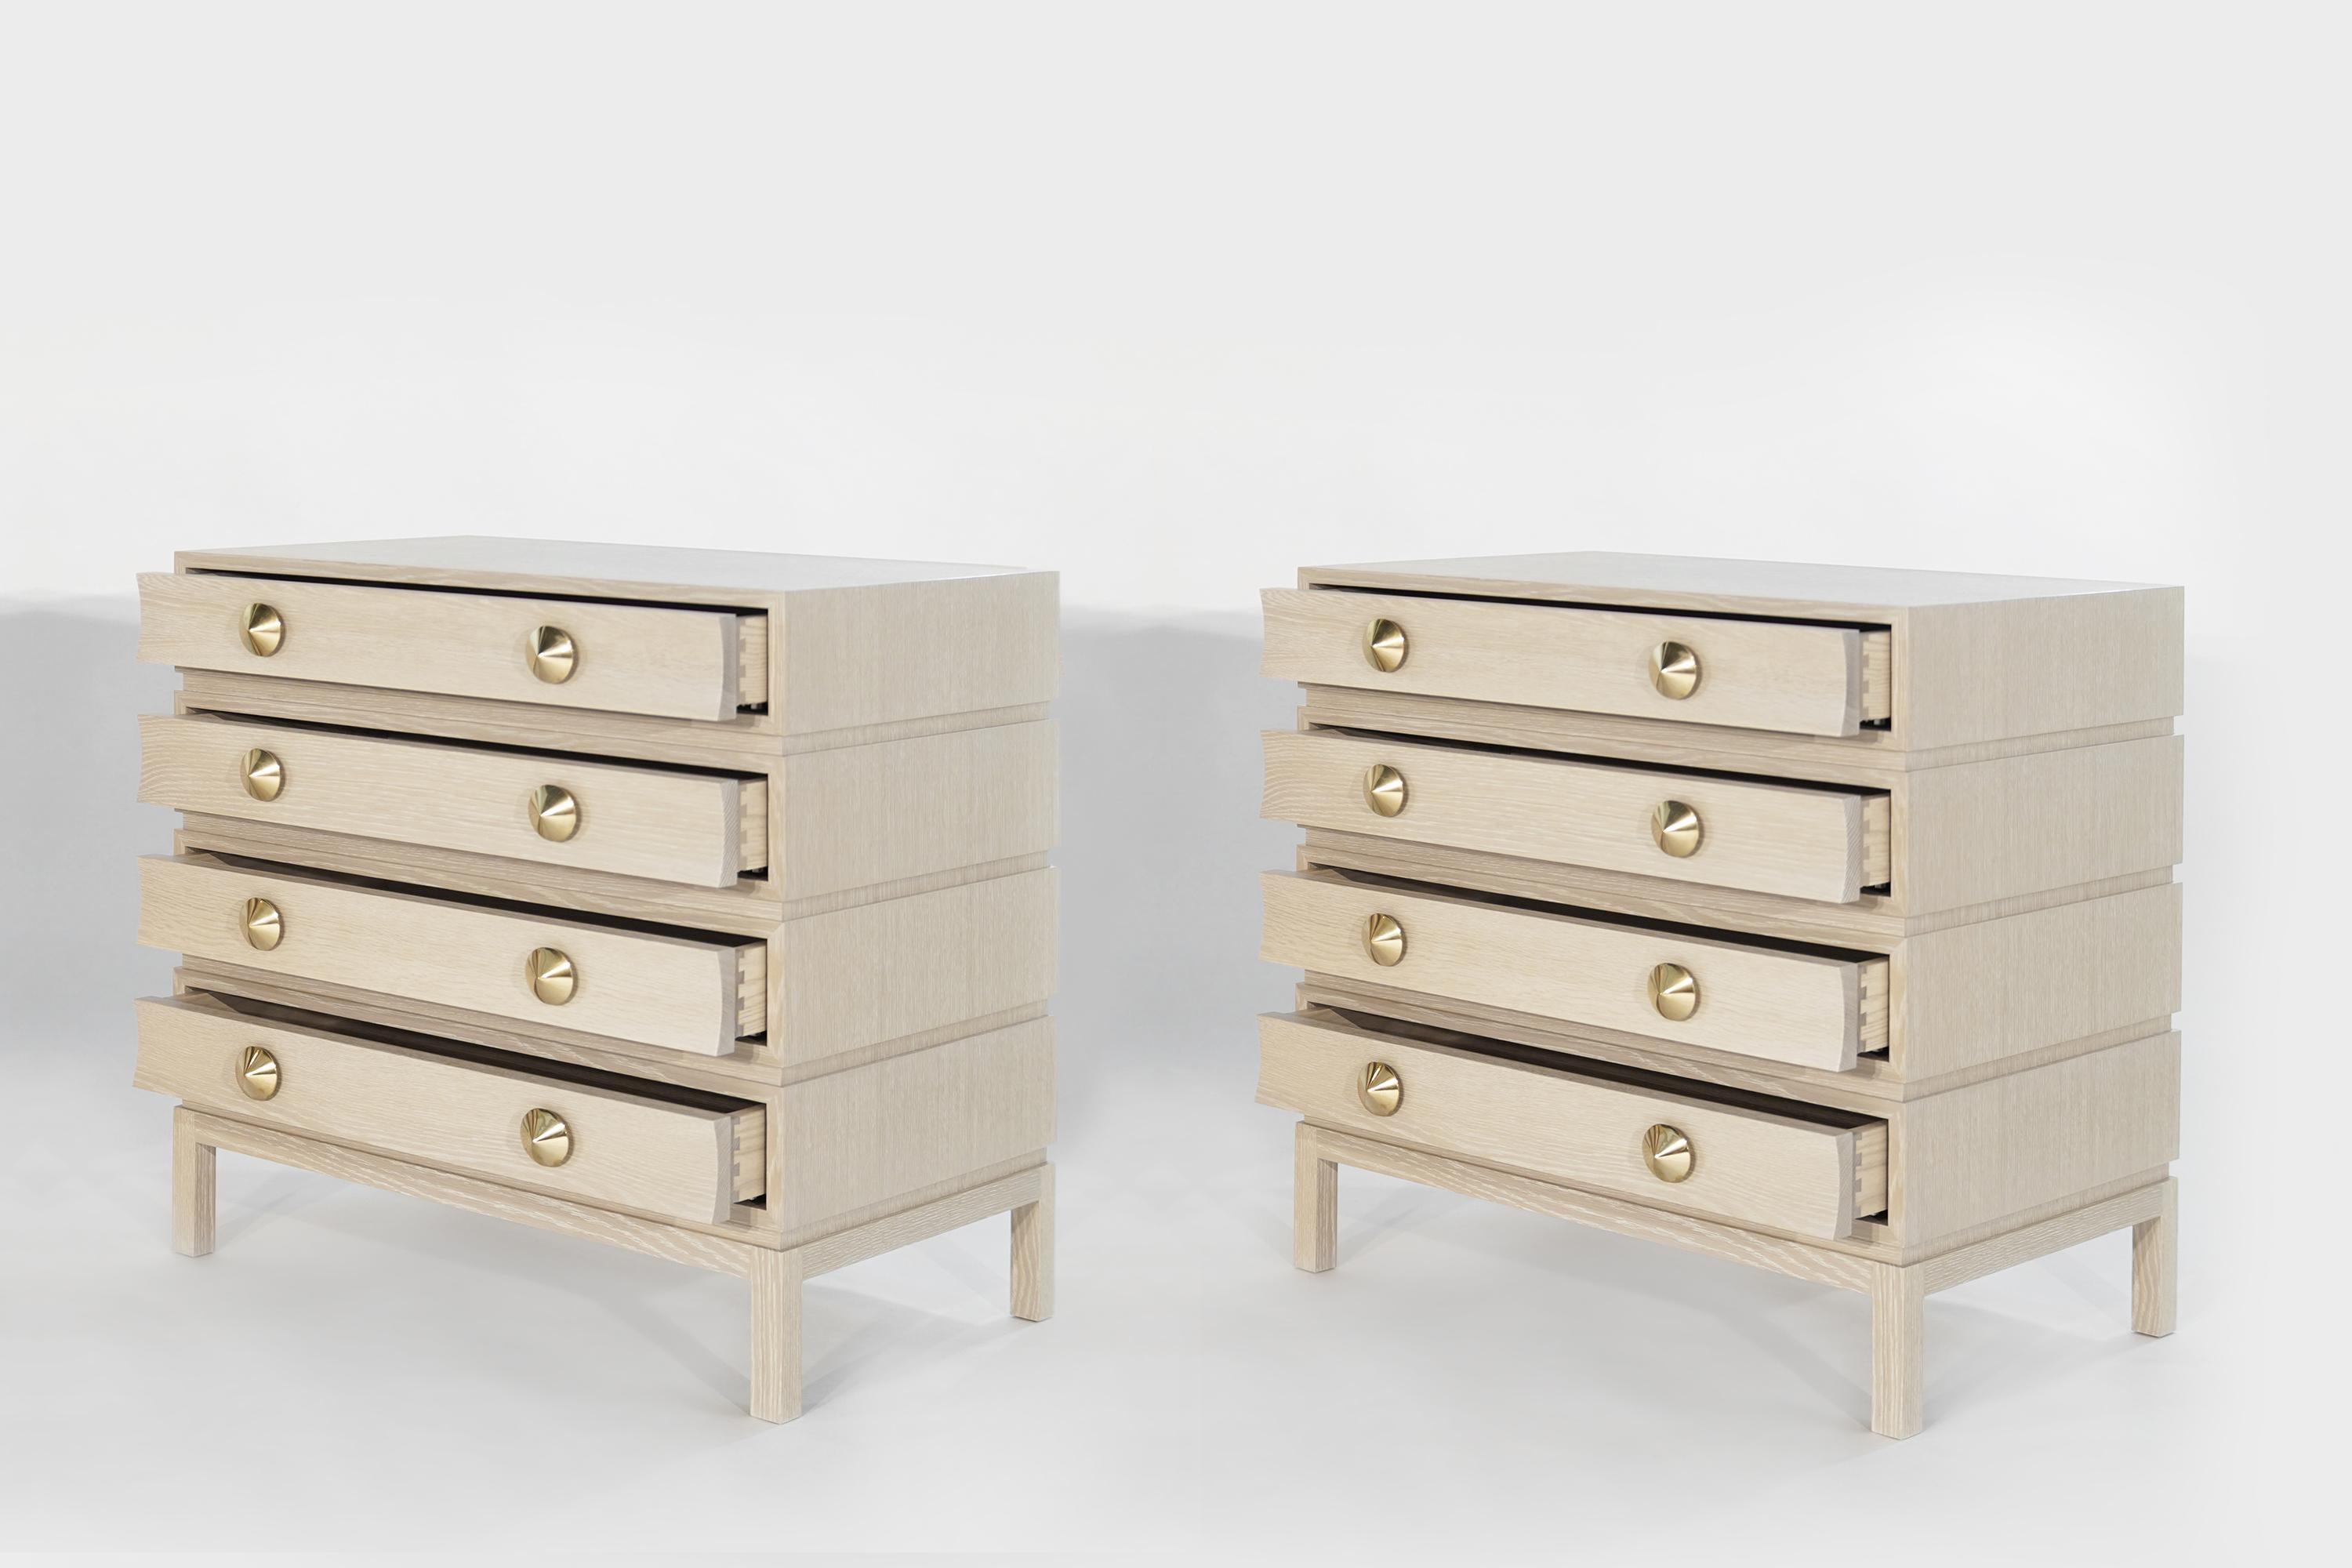 Inspired by the iconic designer Paul Frankl, these rustic modern dressers blend timeless elegance with contemporary flair. The oversized drawer frames and subtly curved fronts create a playful asymmetry, while notched sides add a unique touch,